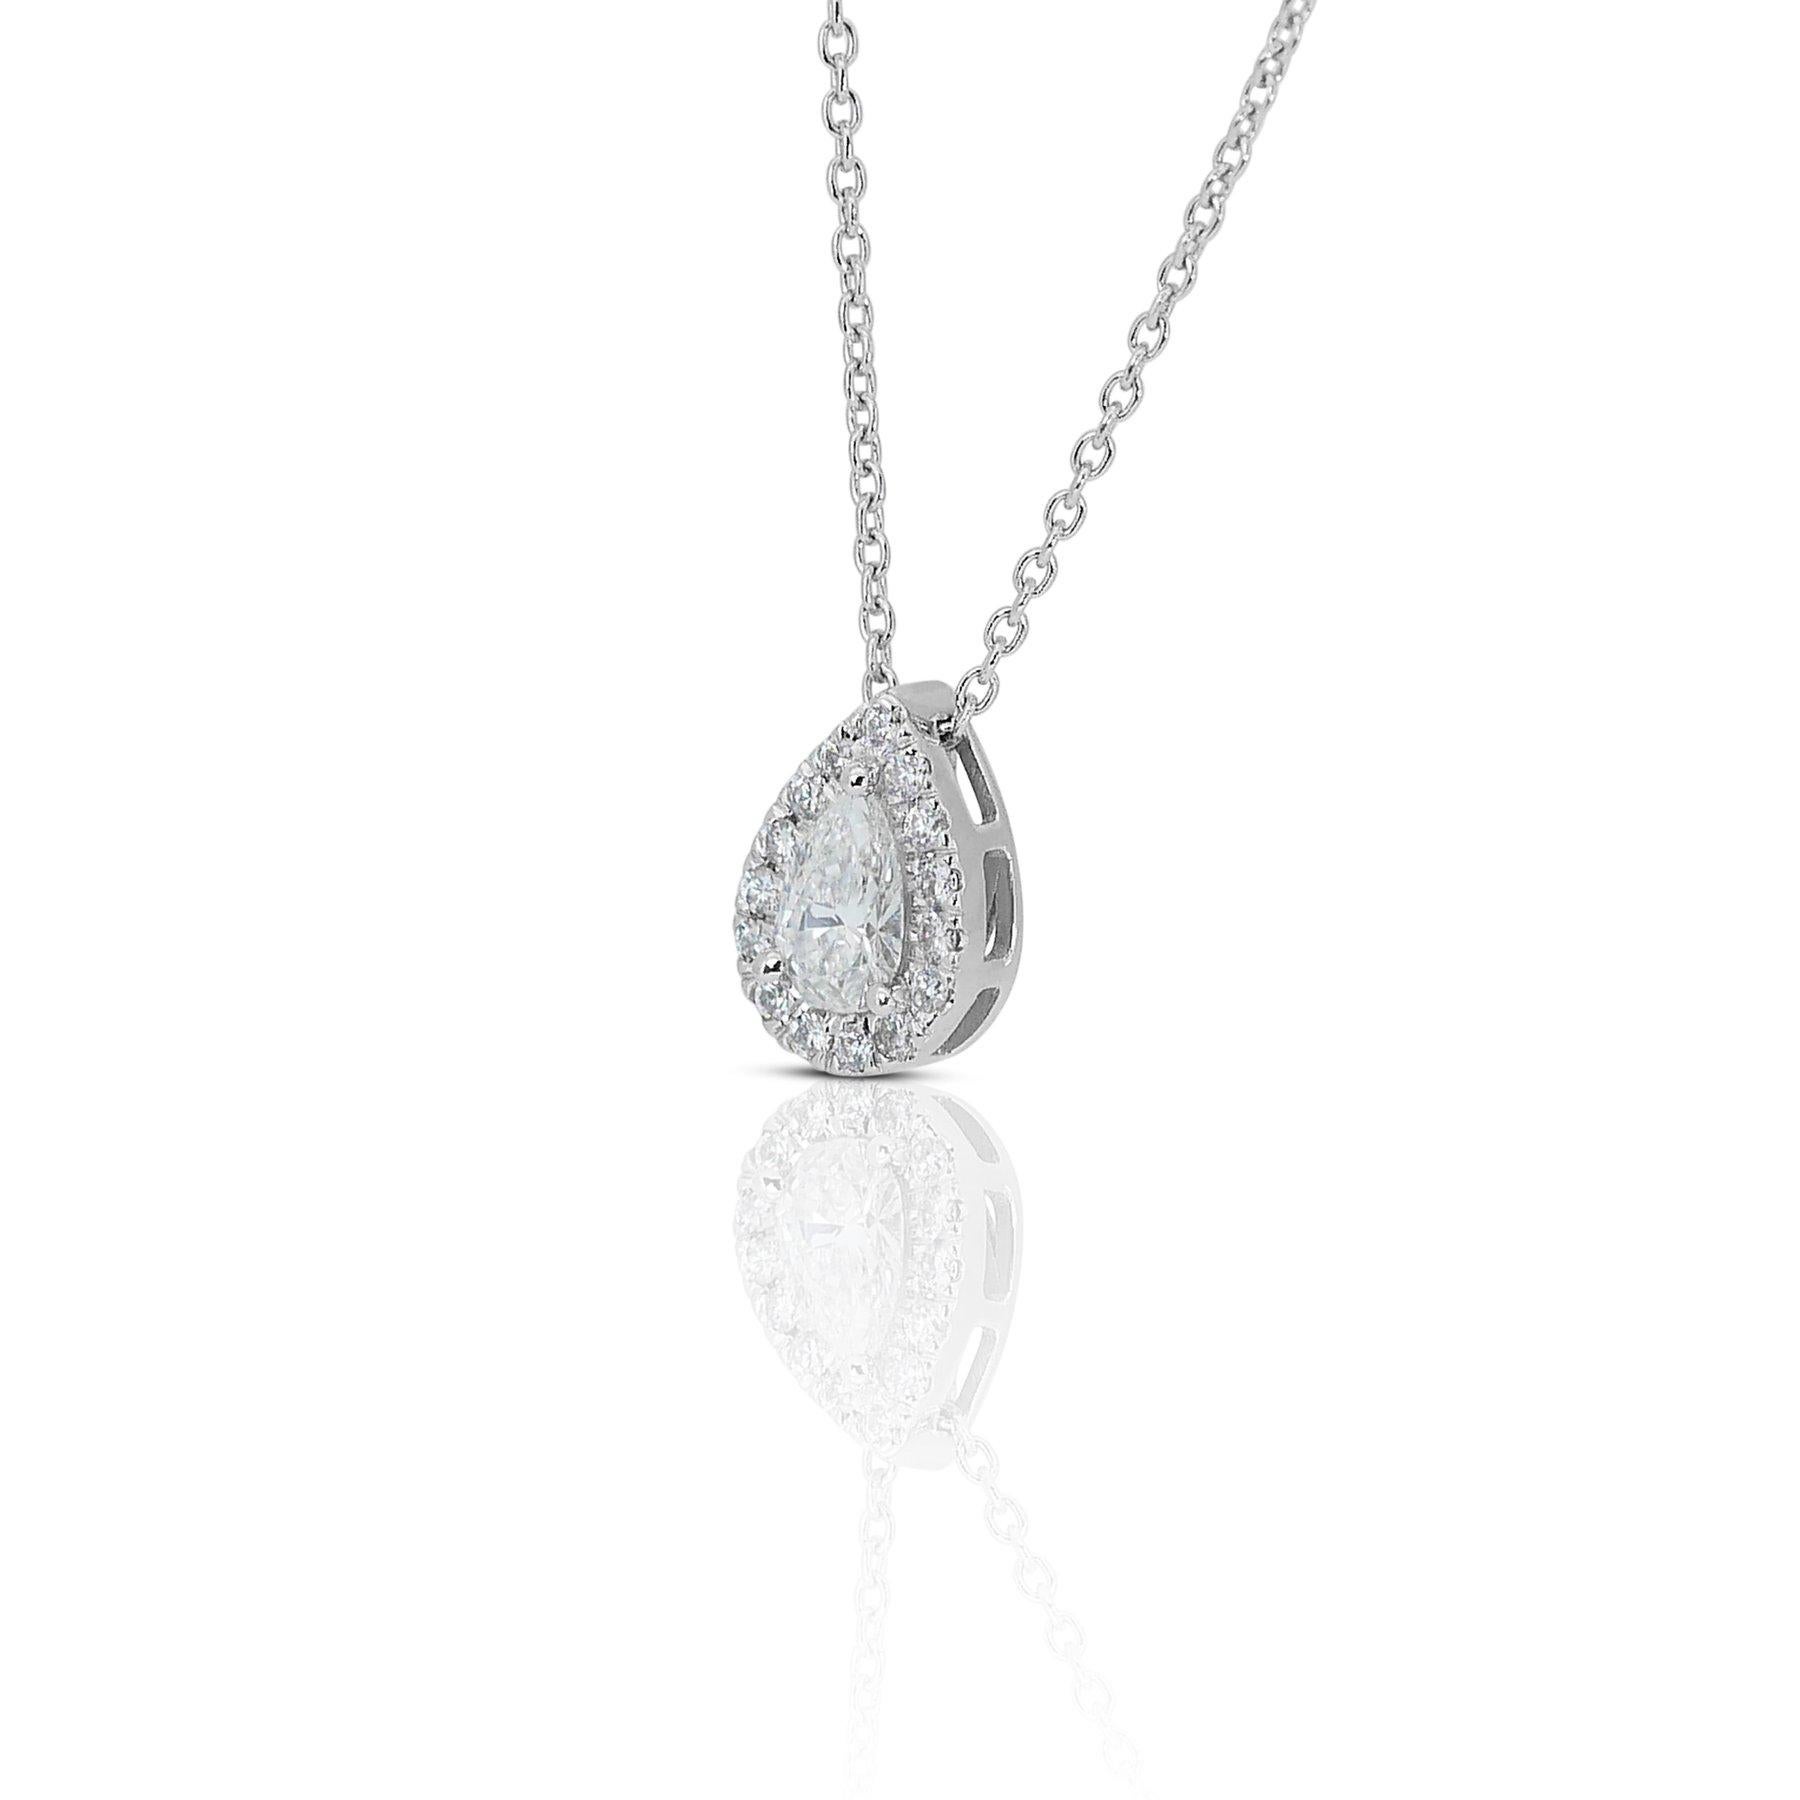 Beautiful 0.71 ct Pear Diamond Halo Necklace in 18k White Gold – GIA Certified

This luxurious pendant is expertly crafted in 18k white gold and features a stunning 0.71-carat pear-shaped diamond as its centerpiece. Accompanying the pear-shaped